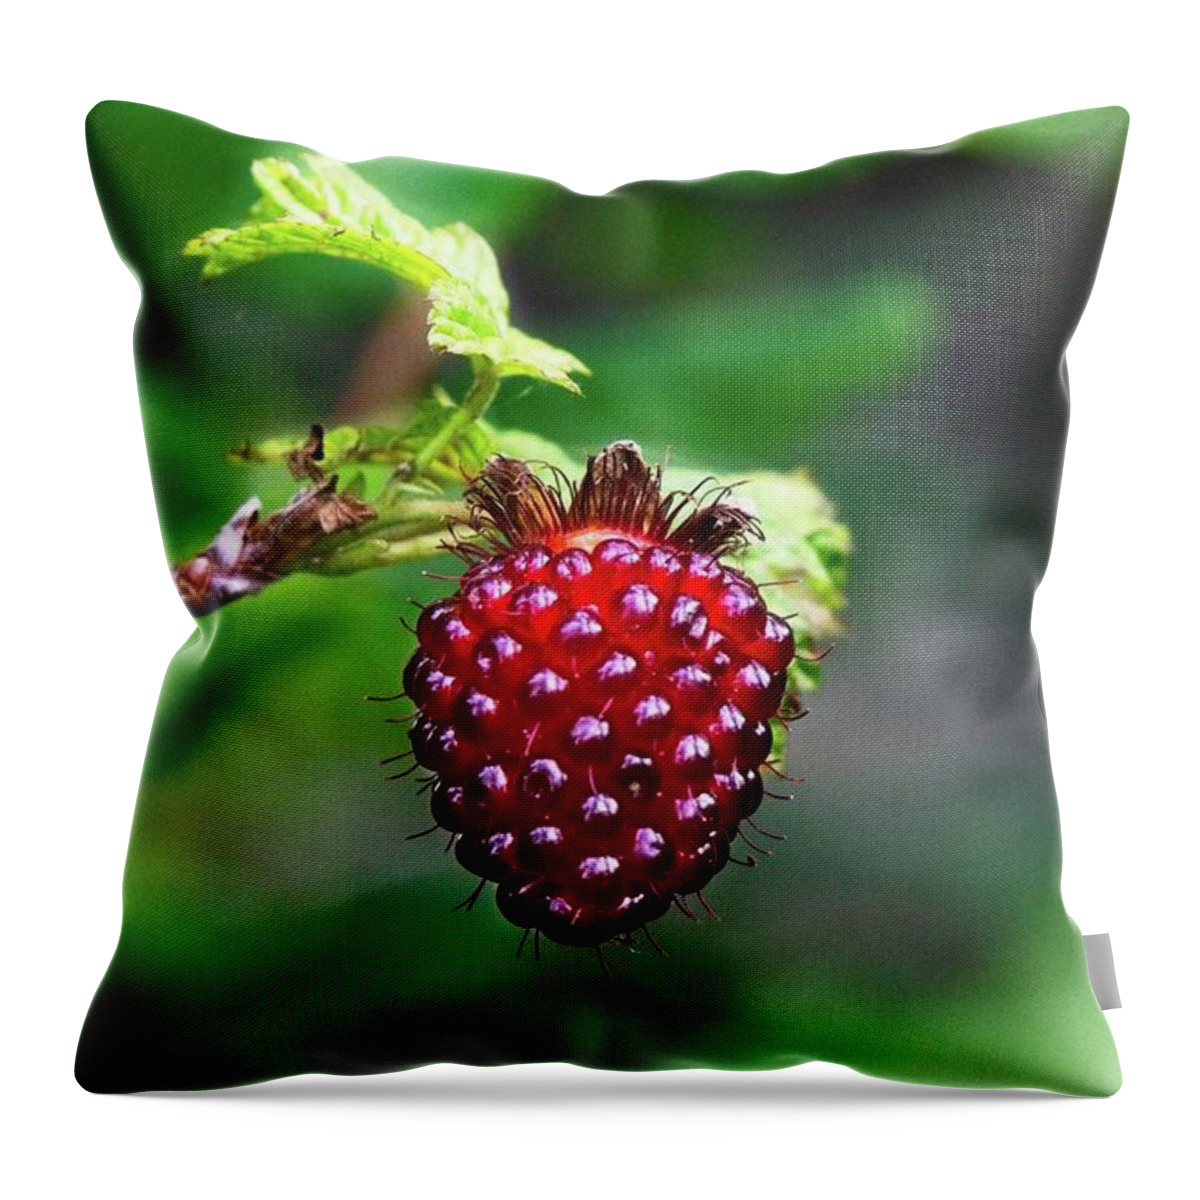 Alone Throw Pillow featuring the photograph A Berry Red Berry by David Desautel